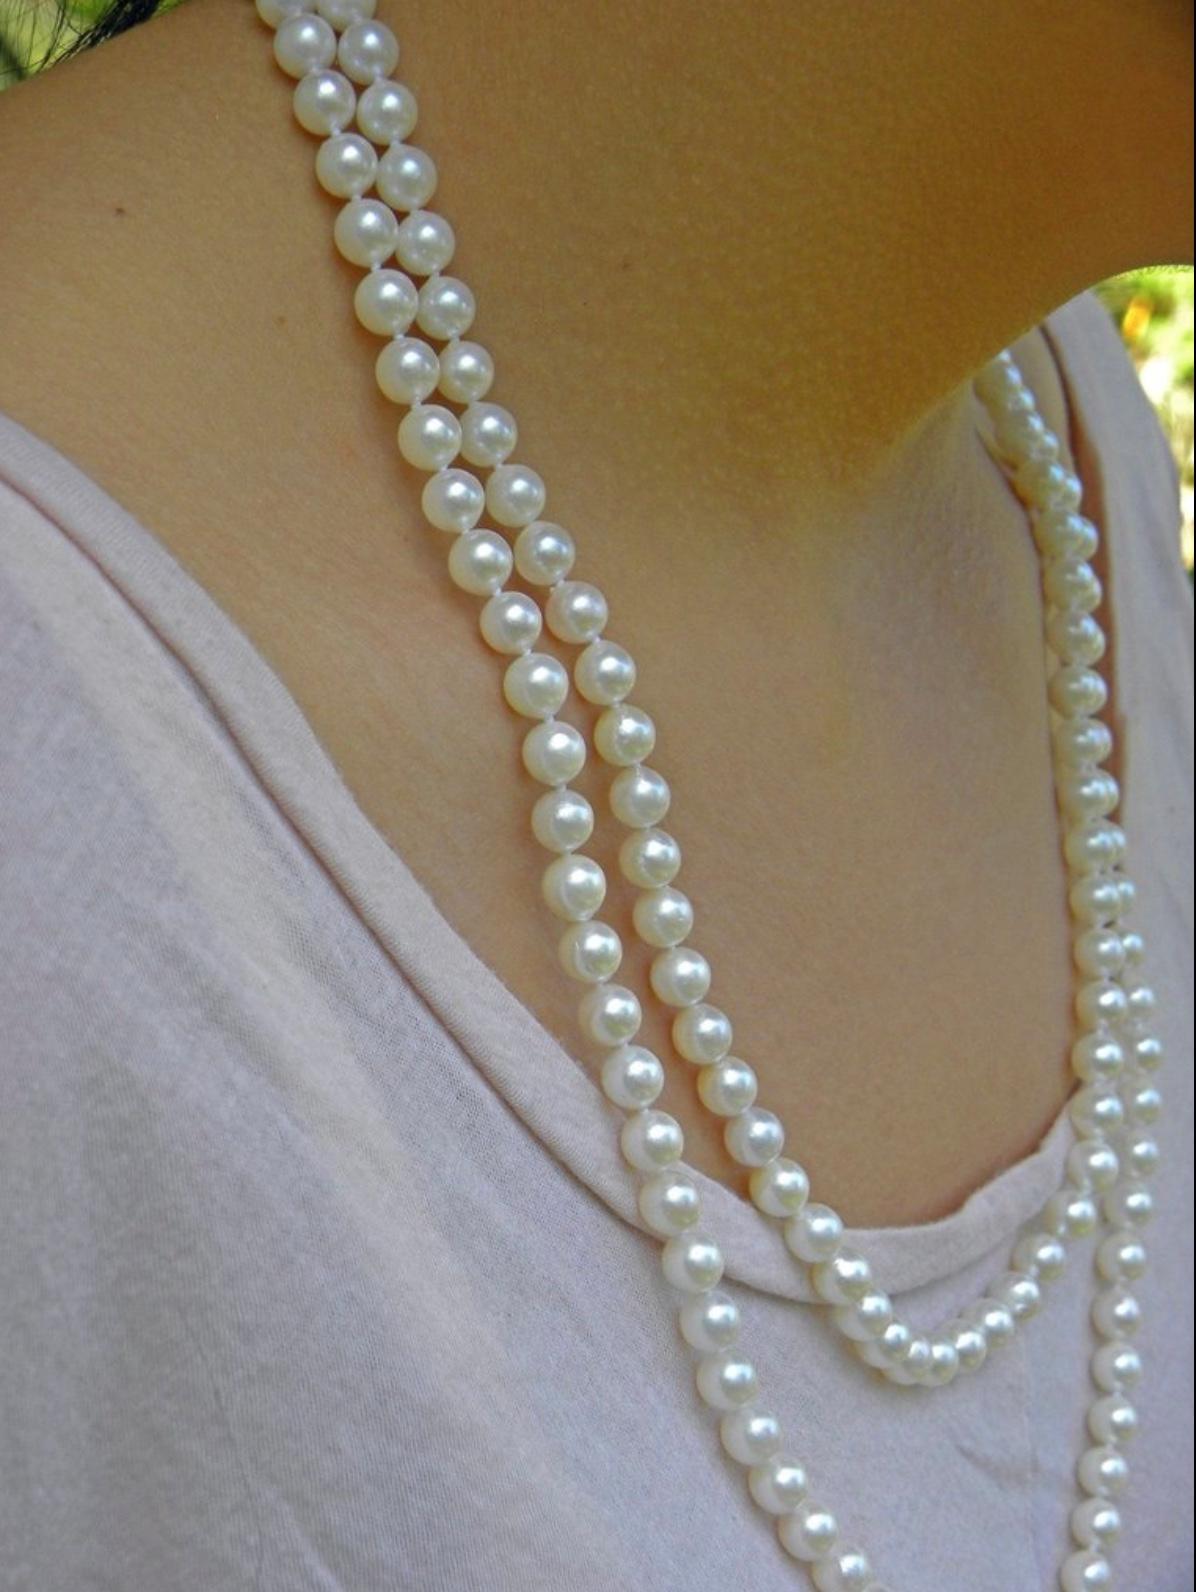 Pearl Origin: Japan
Pearl overall grading: AA - AAA
Length (inches): 48 *Opera length*
Pearl size (approx.): 6.5 to 7.00mm in diameter.
Main Stone: Akoya Cultured Pearl
Pearl Type: Akoya
Main Stone Color: White
Remarks: Pearls may have mild flaws